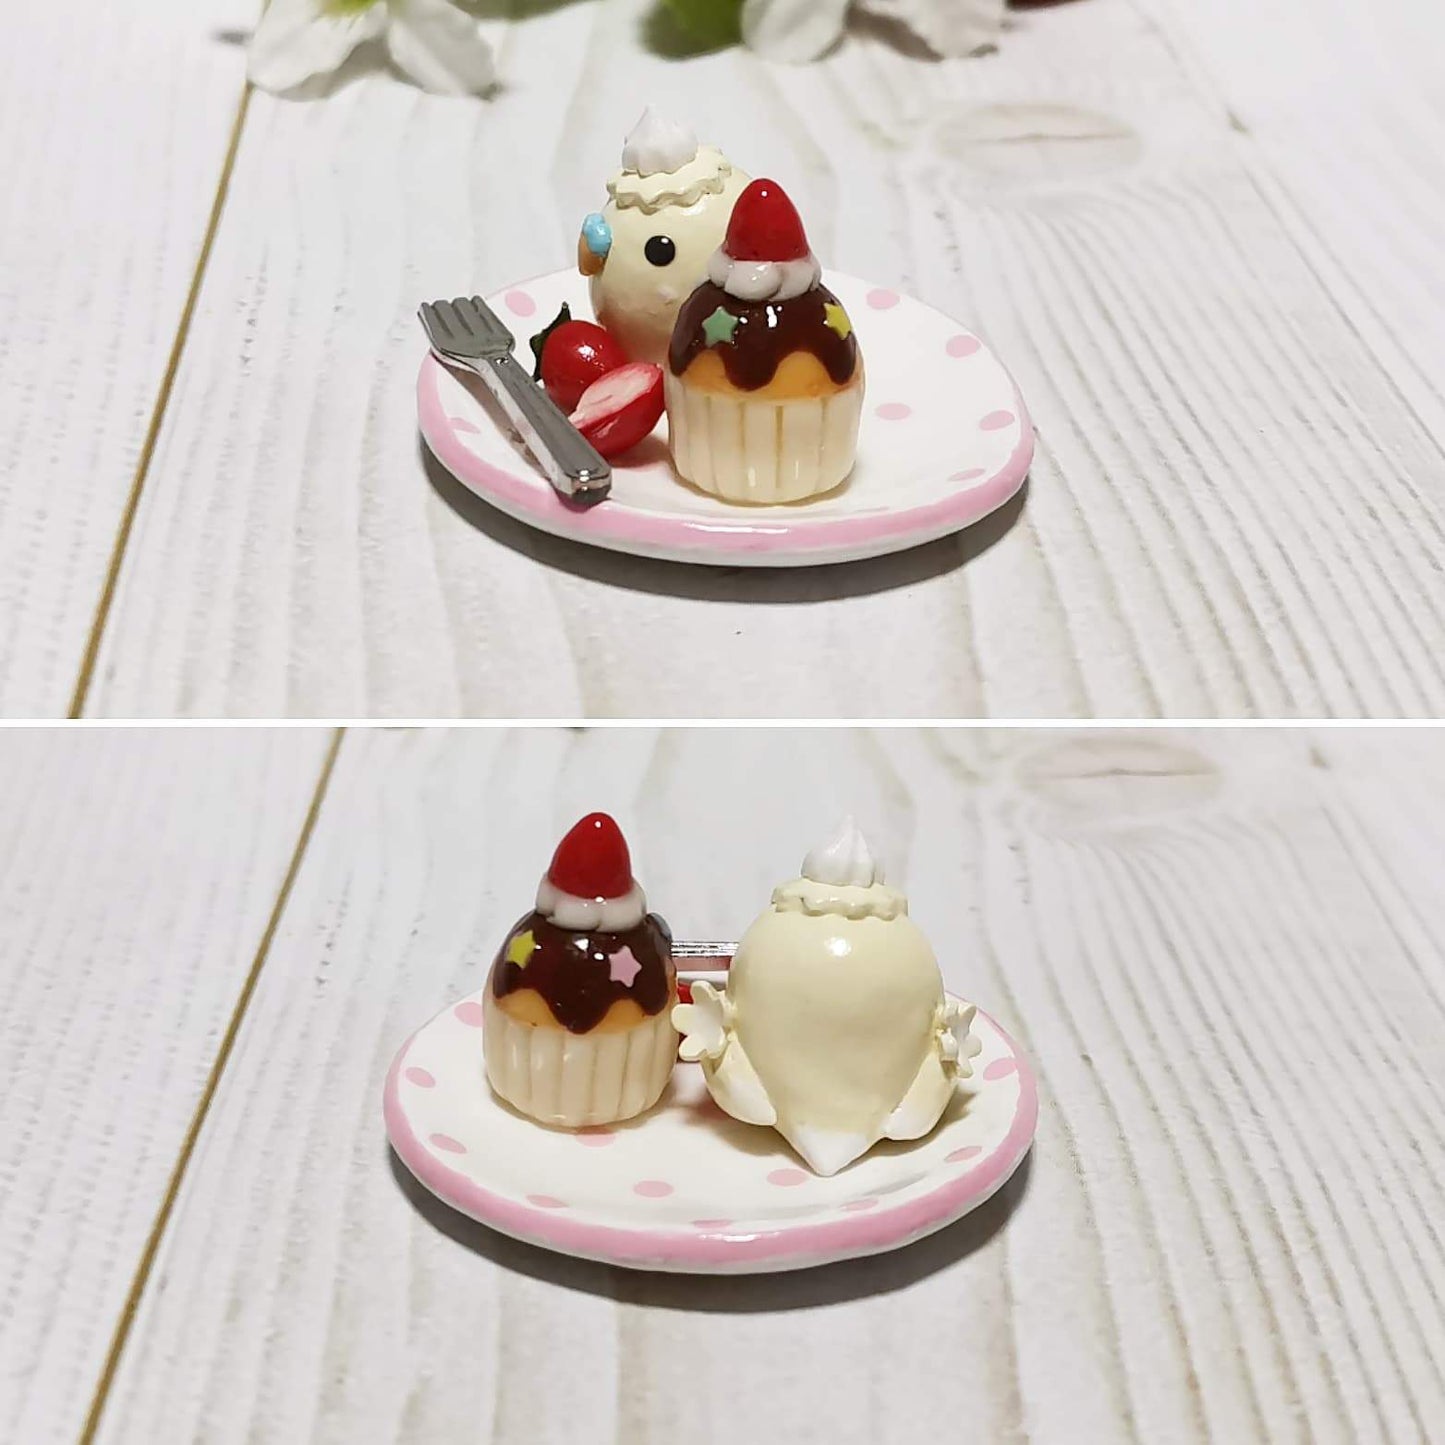 Miniature Japanese Crested Budgie with Strawberry Cupcake